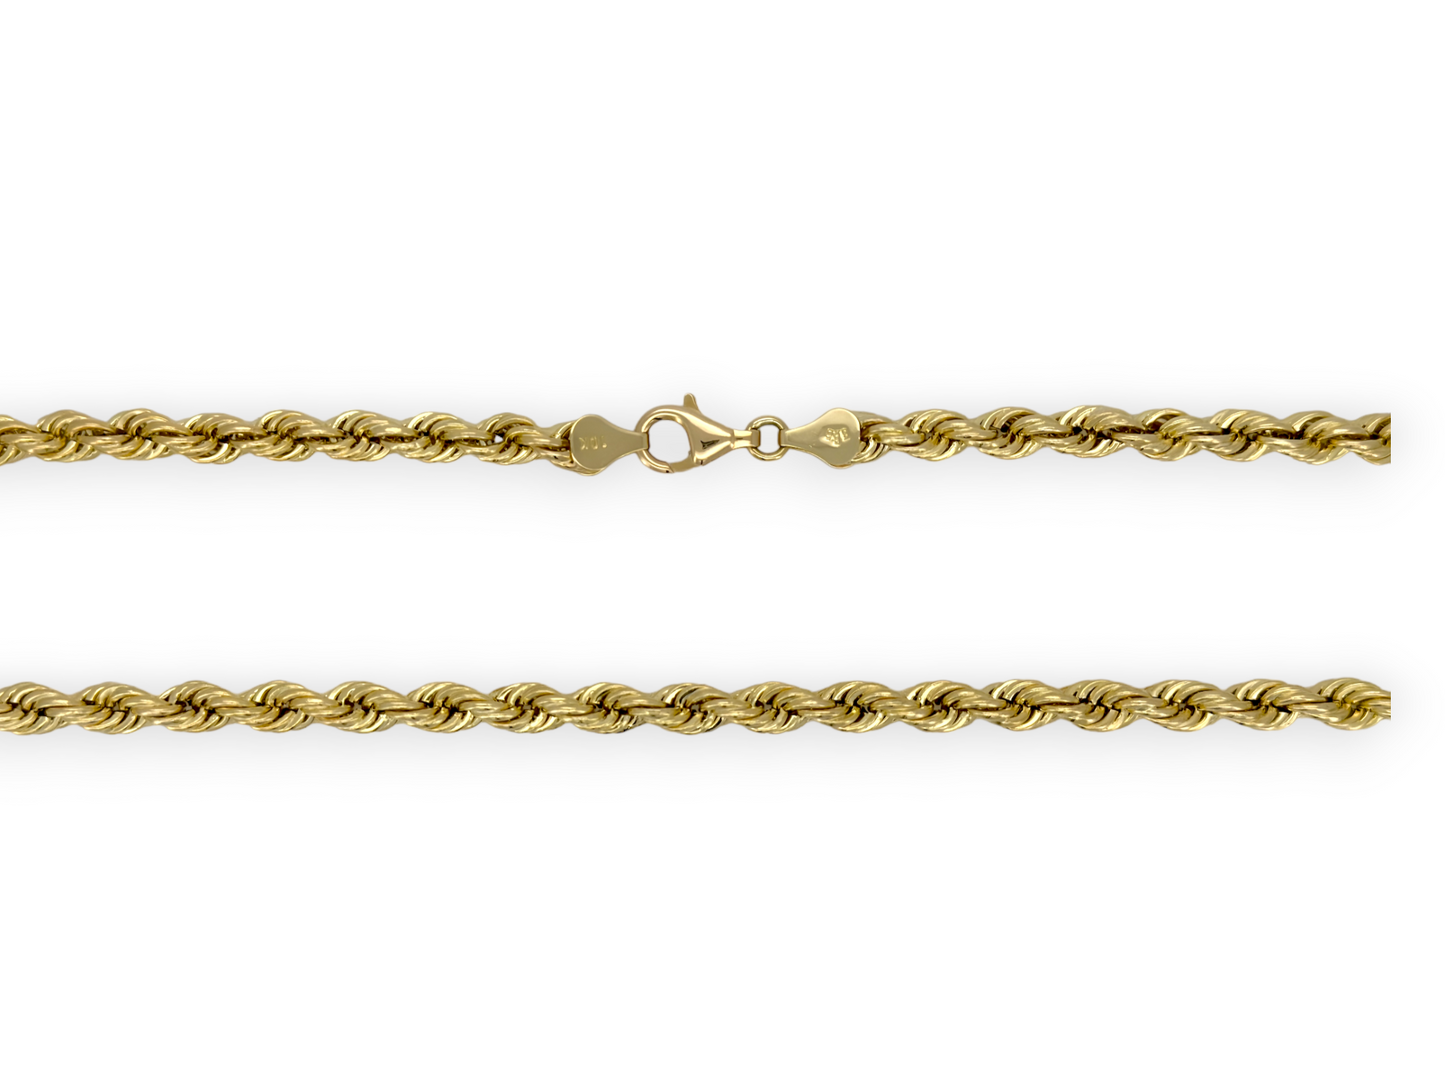 Rope Chain Necklace - 10K Yellow Gold - Hollow